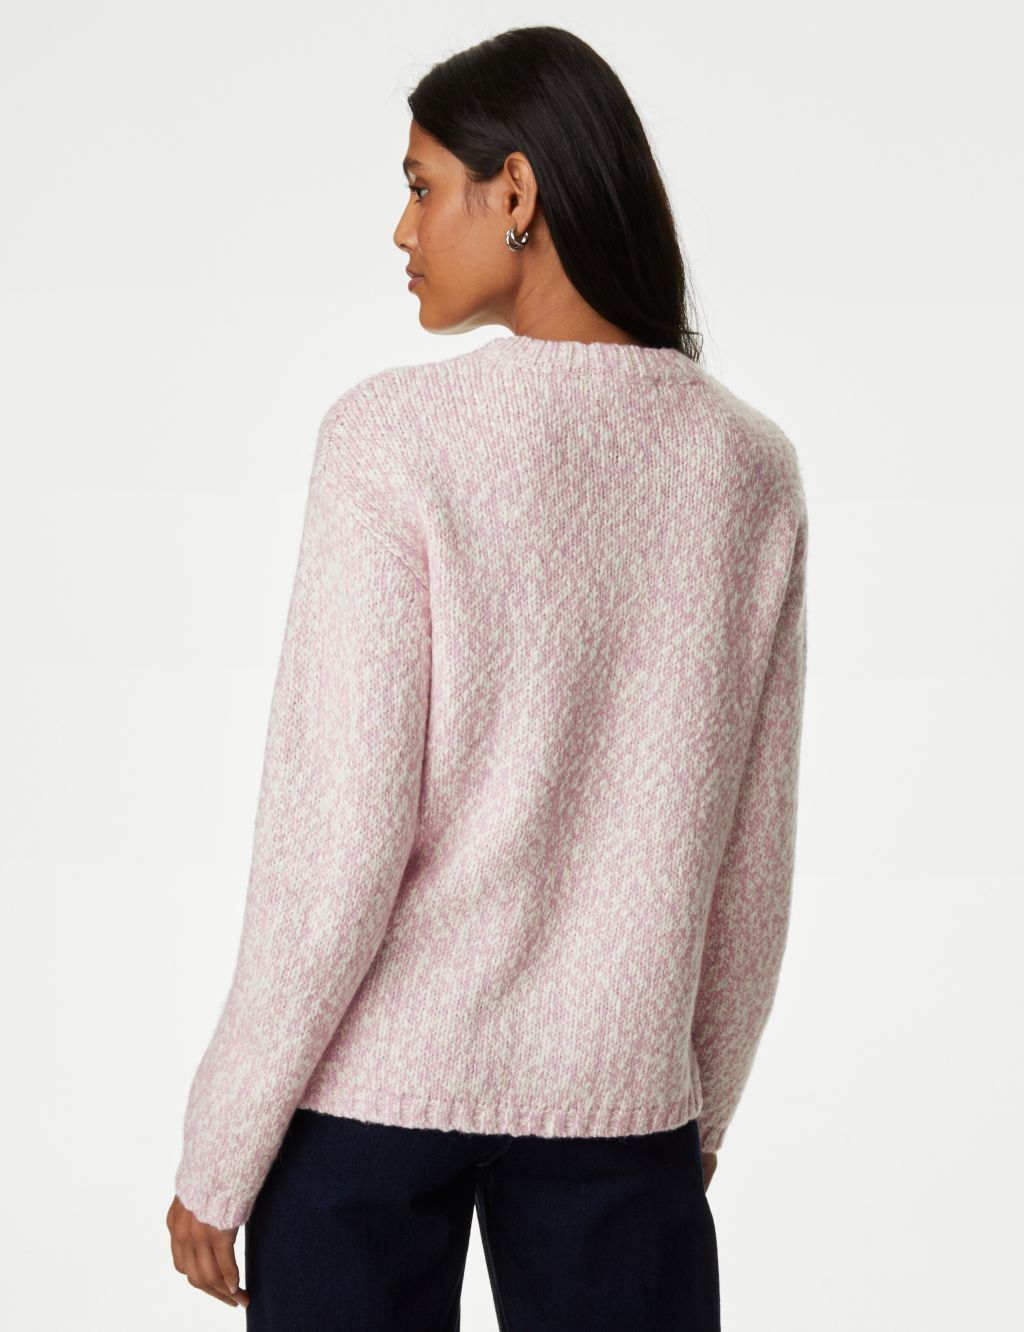 Textured Crew Neck Jumper with Wool image 5